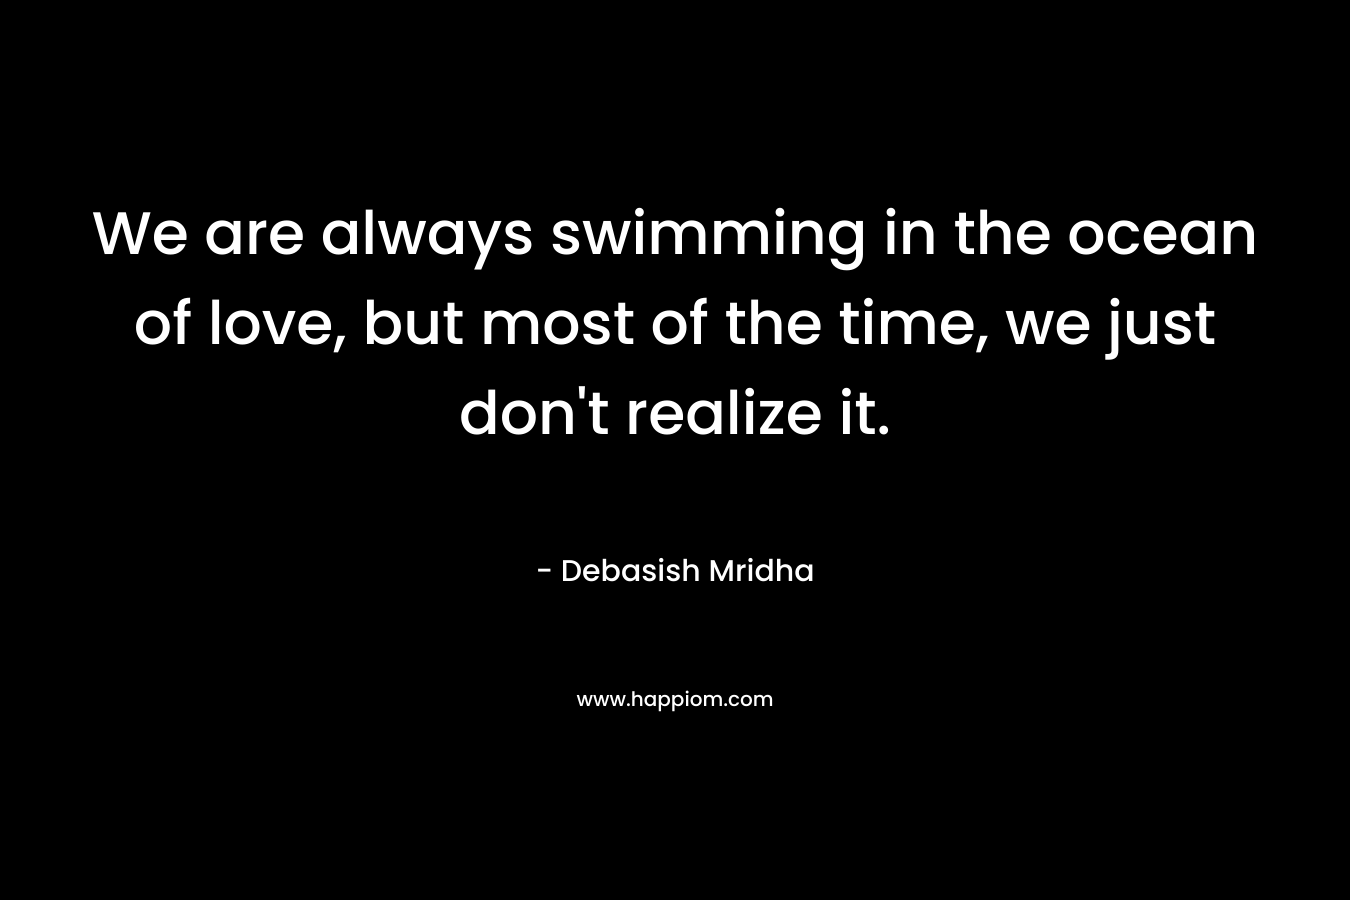 We are always swimming in the ocean of love, but most of the time, we just don't realize it.